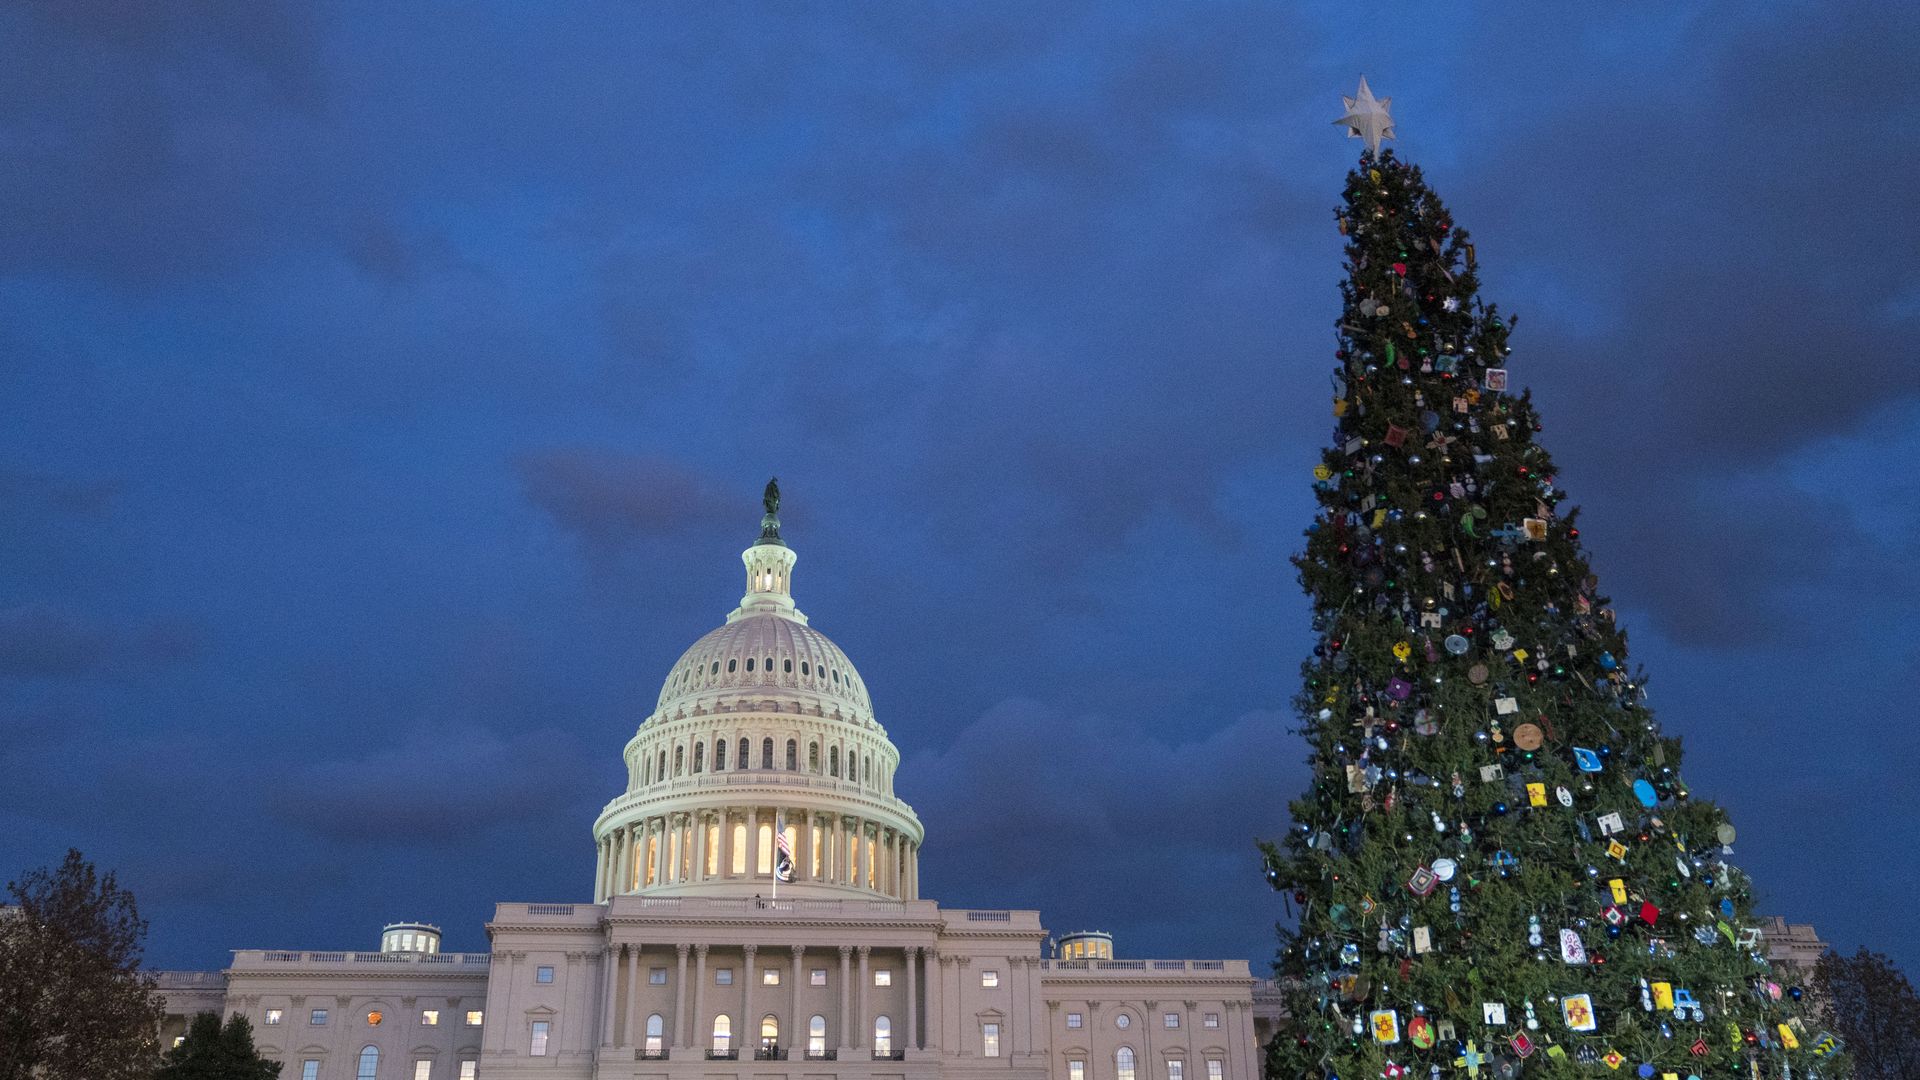 The U.S. Capitol at dusk with the national Christmas tree in the forefront.